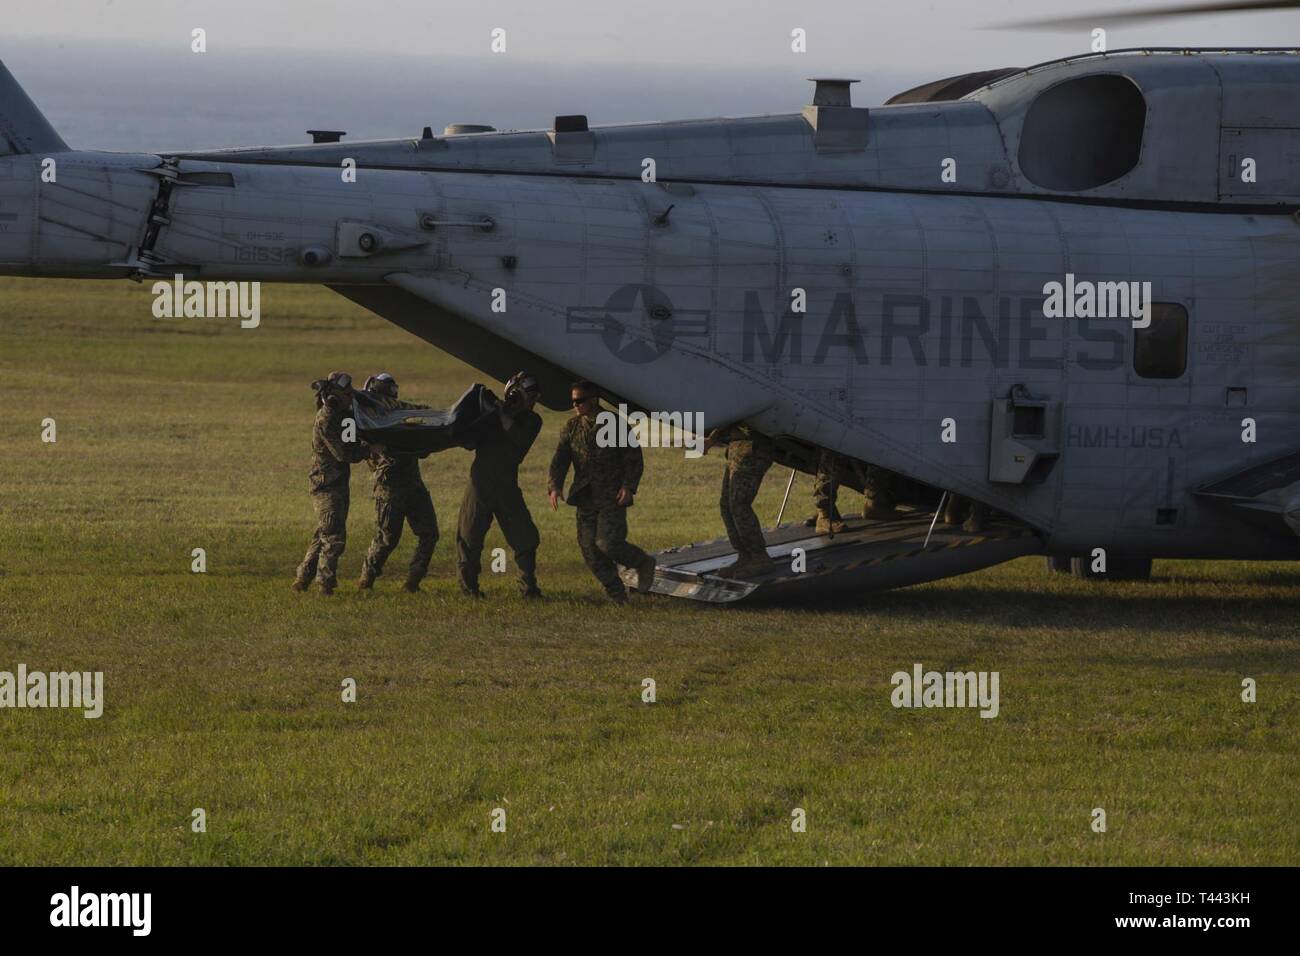 Marines with the 31st Marine Expeditionary Unit load gear onto a CH-53E Super Stallion helicopter with Marine Medium Tiltrotor Squadron 262 (Reinforced) during simulated Expeditionary Advanced Base Operations at Ie Shima Training Facility, March 13, 2019. Marines with the 31st MEU are conducting simulated EABO in a series of dynamic training events to refine their ability to plan, rehearse and complete a variety of missions. During EABO, the 31st MEU partnered with the 3rd Marine Division, 3rd Marine Logistics Group and 1st Marine Aircraft Wing, and airmen with the U.S. Air Force 353rd Special Stock Photo